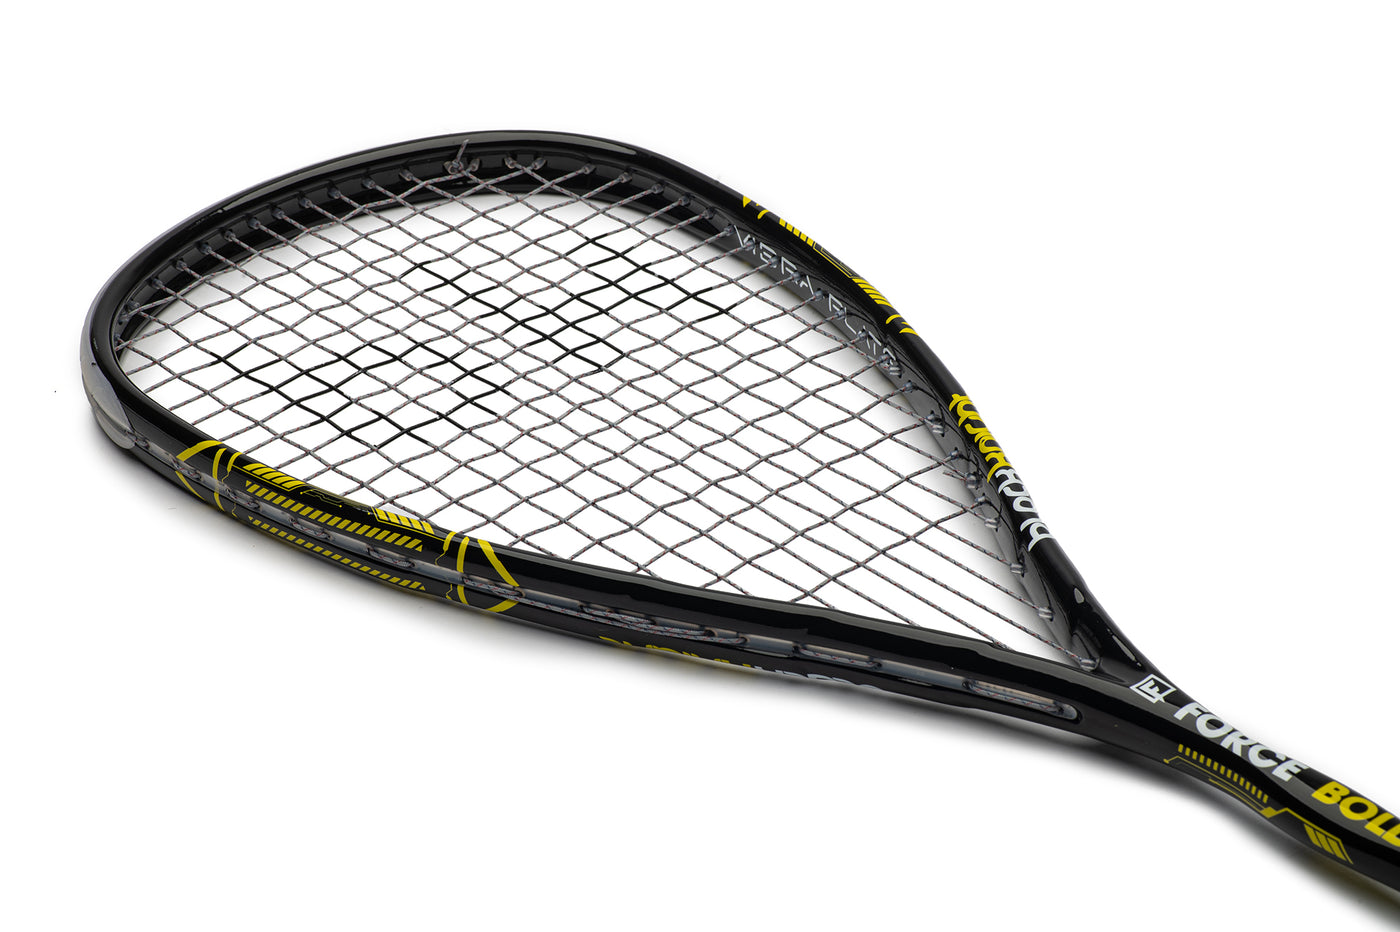 *NEW* Force Bold Squash Racquet